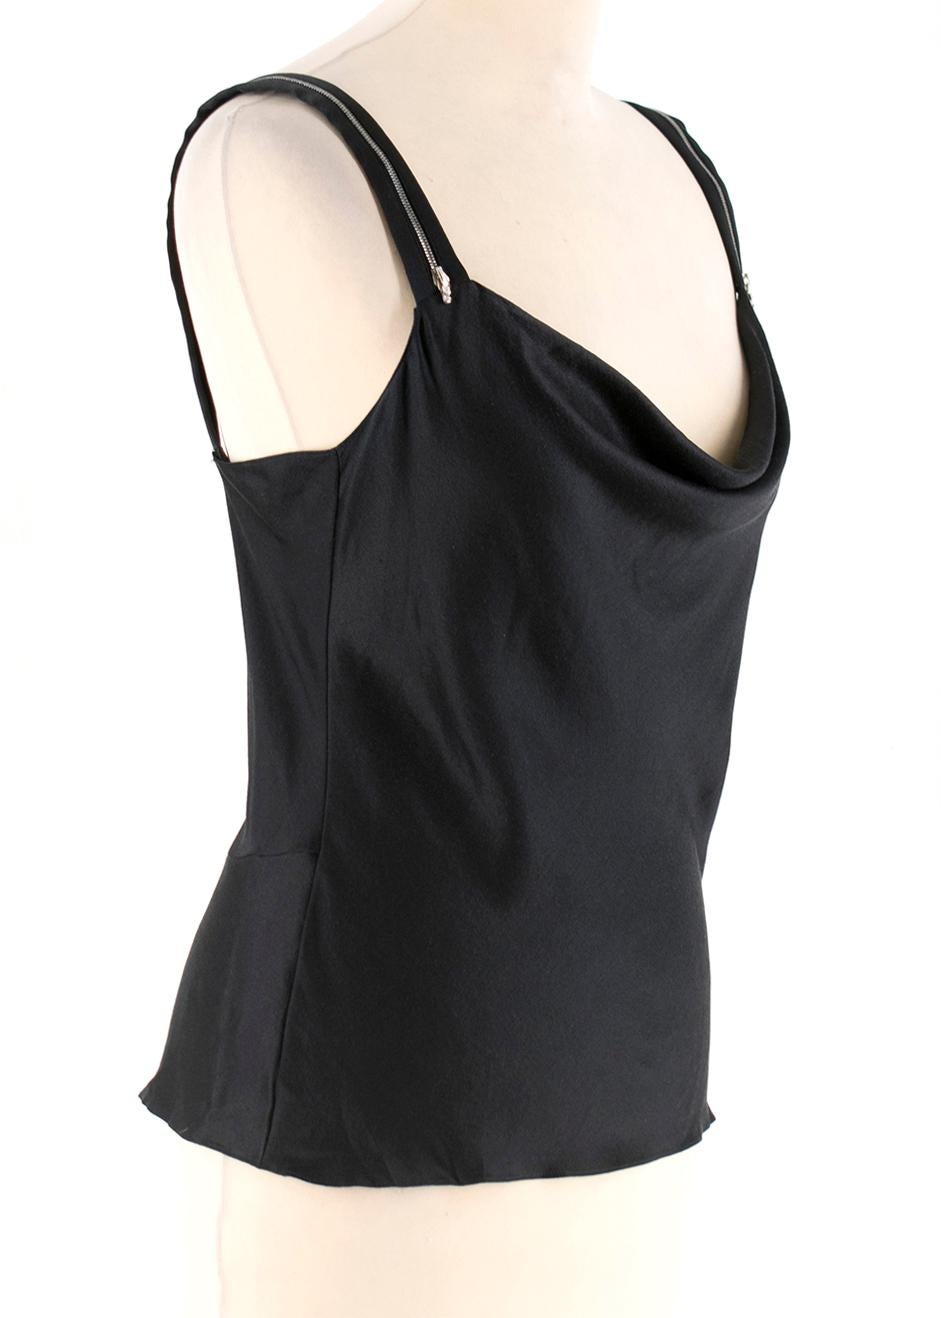 Dior Silk Black Camisole with Shoulder Zip Detail

- Draped Front 
- Embossed Zip and Lock 
- Silk and Zip Straps 
- Silver tone Hardware

Made in France 

Please note, these items are pre-owned and may show signs of being stored even when unworn